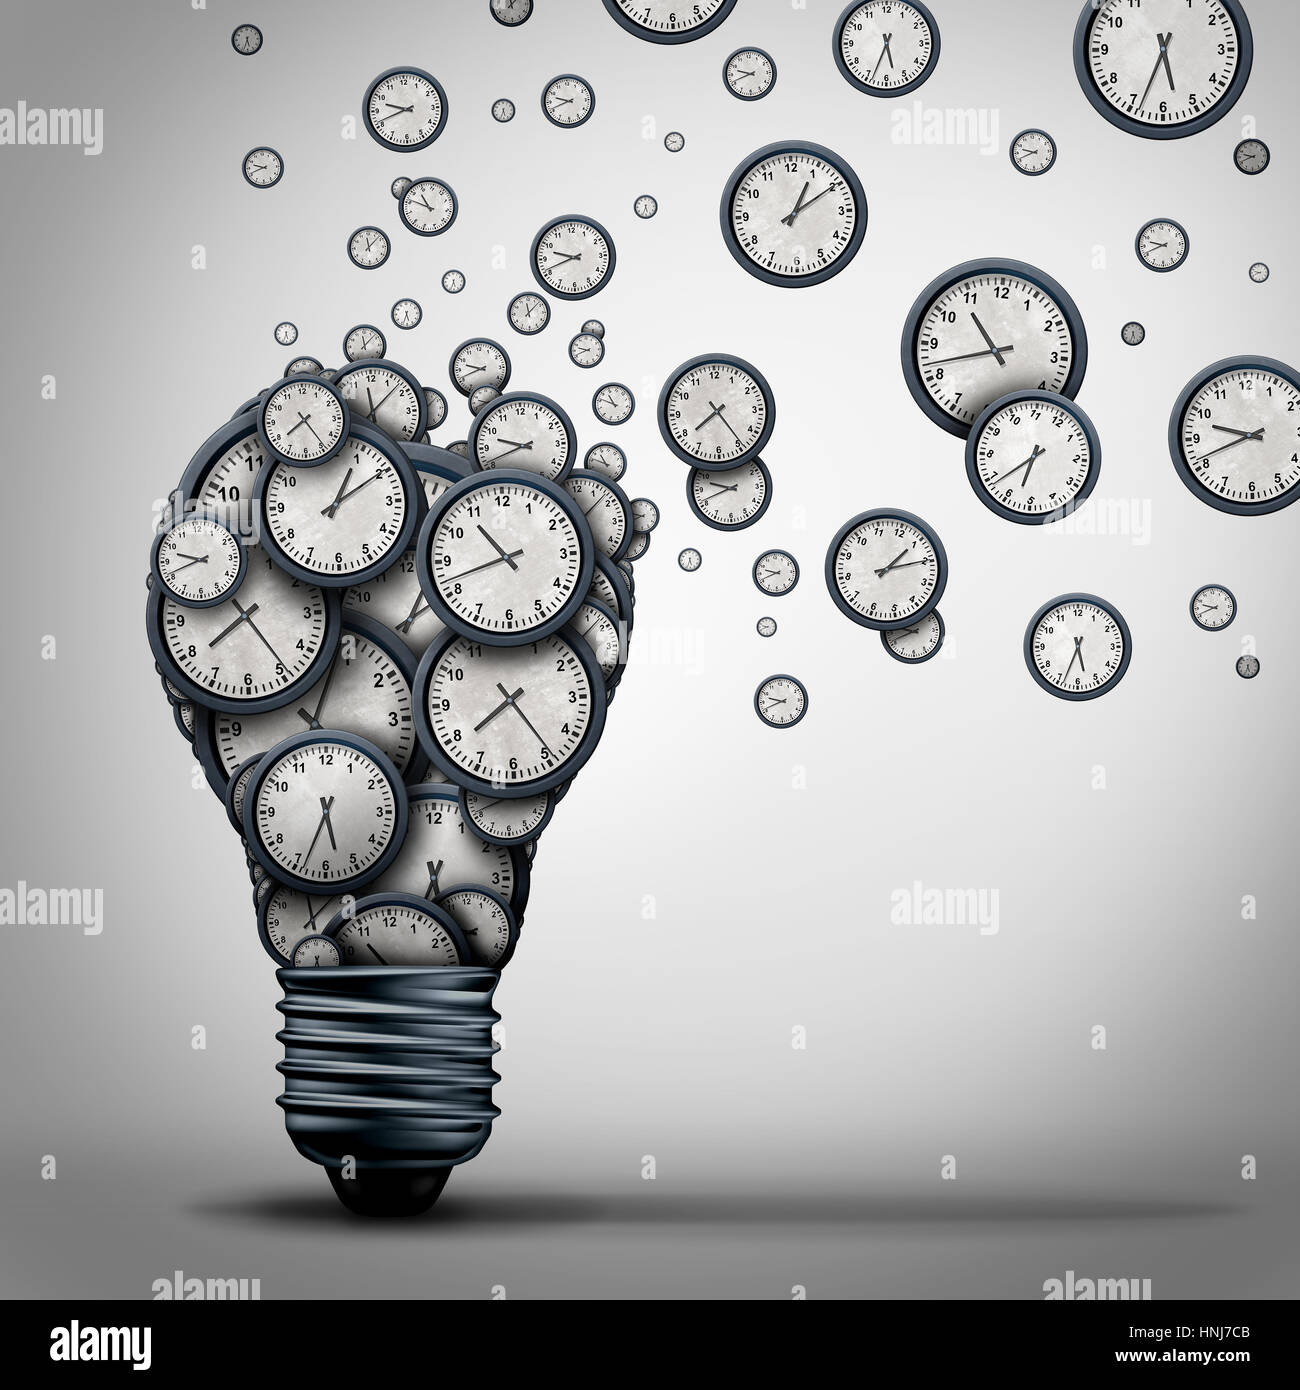 Time marketing idea business training education concept as a group of clock objects shaped as a light bulb that is spreading. Stock Photo